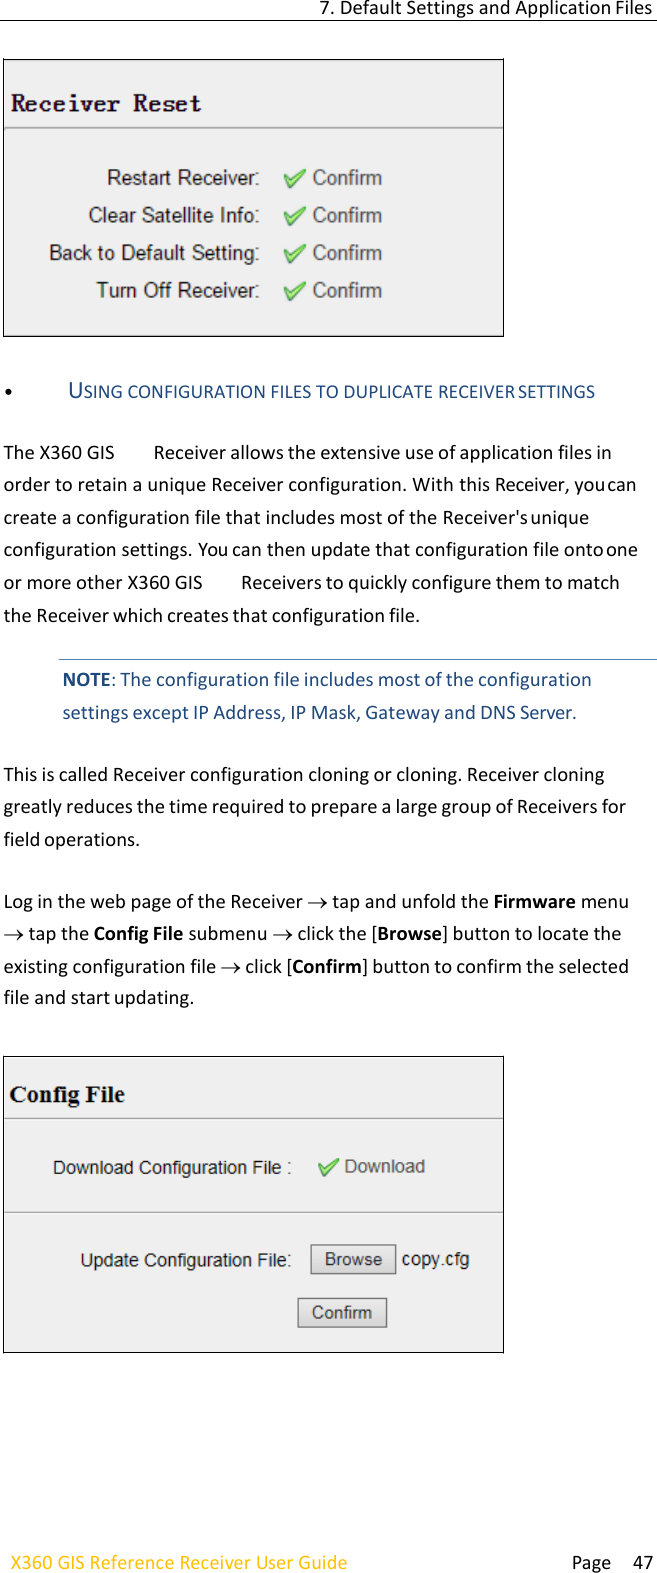  Page 47 X360 GIS Reference Receiver User Guide   7. Default Settings and Application Files     • USING CONFIGURATION FILES TO DUPLICATE RECEIVER SETTINGS  The X360 GIS  Receiver allows the extensive use of application files in order to retain a unique Receiver configuration. With this Receiver, you can create a configuration file that includes most of the Receiver&apos;s unique configuration settings. You can then update that configuration file onto one or more other X360 GIS  Receivers to quickly configure them to match the Receiver which creates that configuration file.   NOTE: The configuration file includes most of the configuration settings except IP Address, IP Mask, Gateway and DNS Server.  This is called Receiver configuration cloning or cloning. Receiver cloning greatly reduces the time required to prepare a large group of Receivers for field operations.  Log in the web page of the Receiver tap and unfold the Firmware menu tap the Config File submenu click the [Browse] button to locate the existing configuration file click [Confirm] button to confirm the selected file and start updating.        